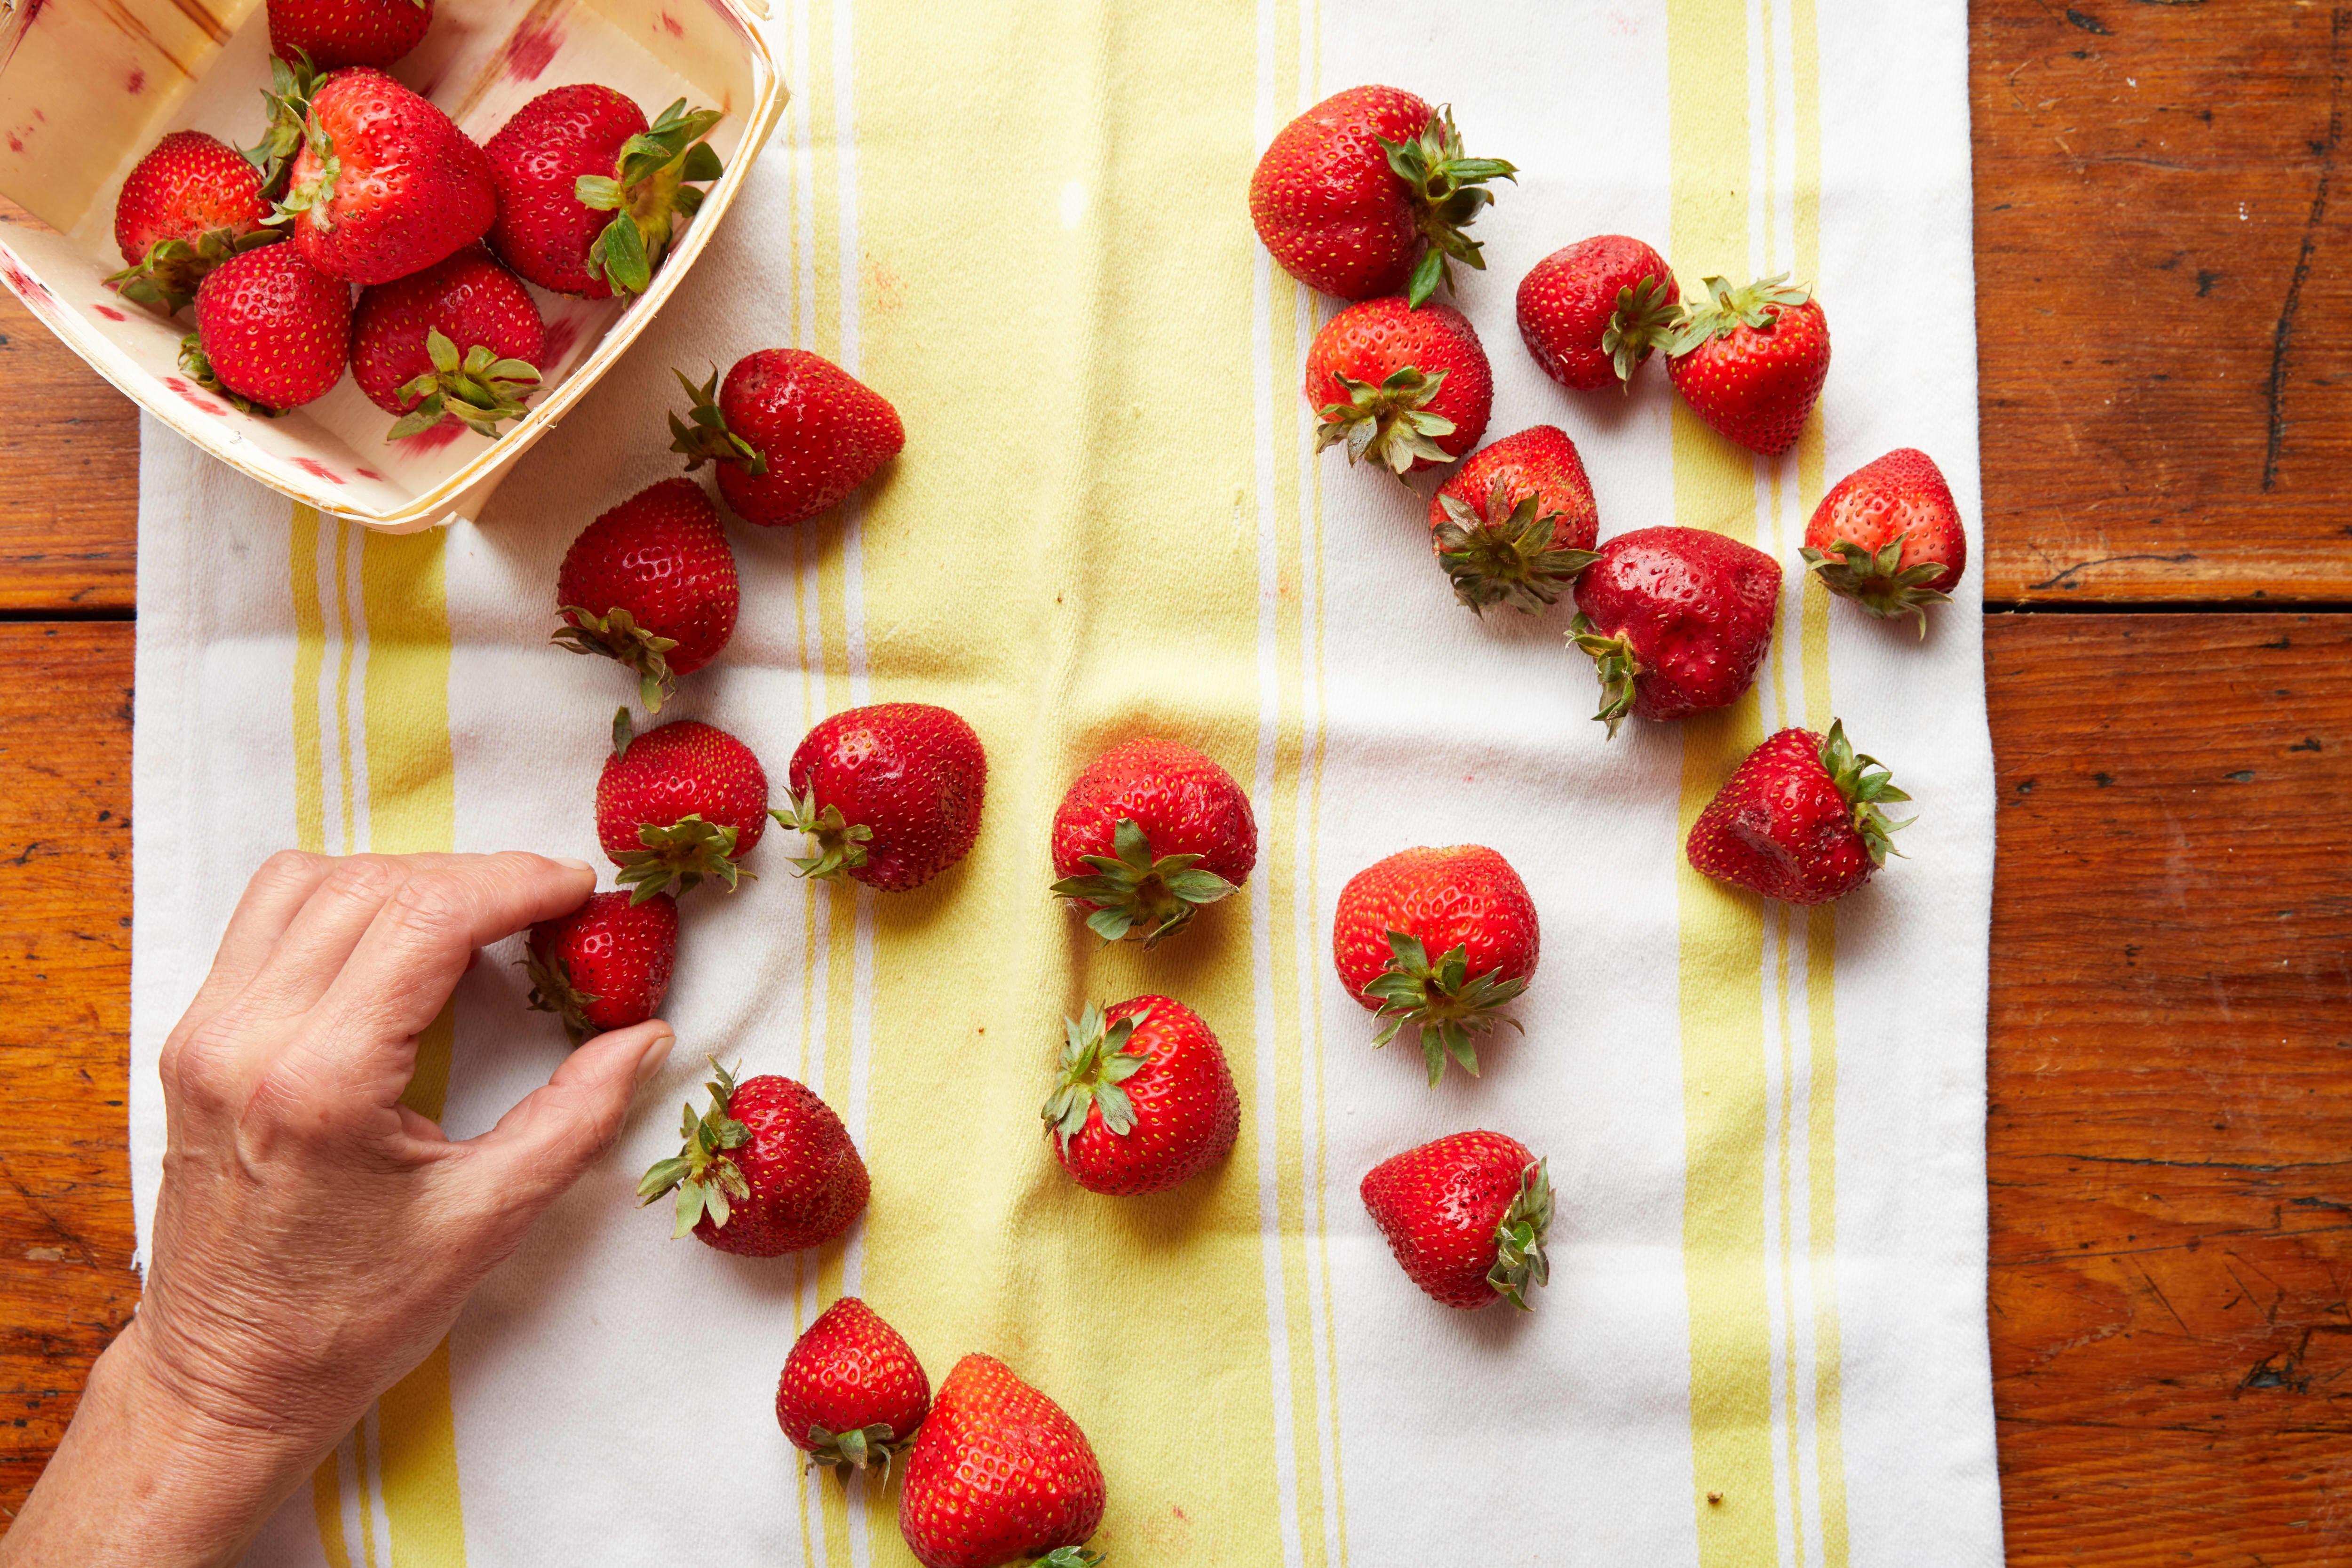 How to Clean Strawberries (So They Last Longer)! - Lexi's Clean